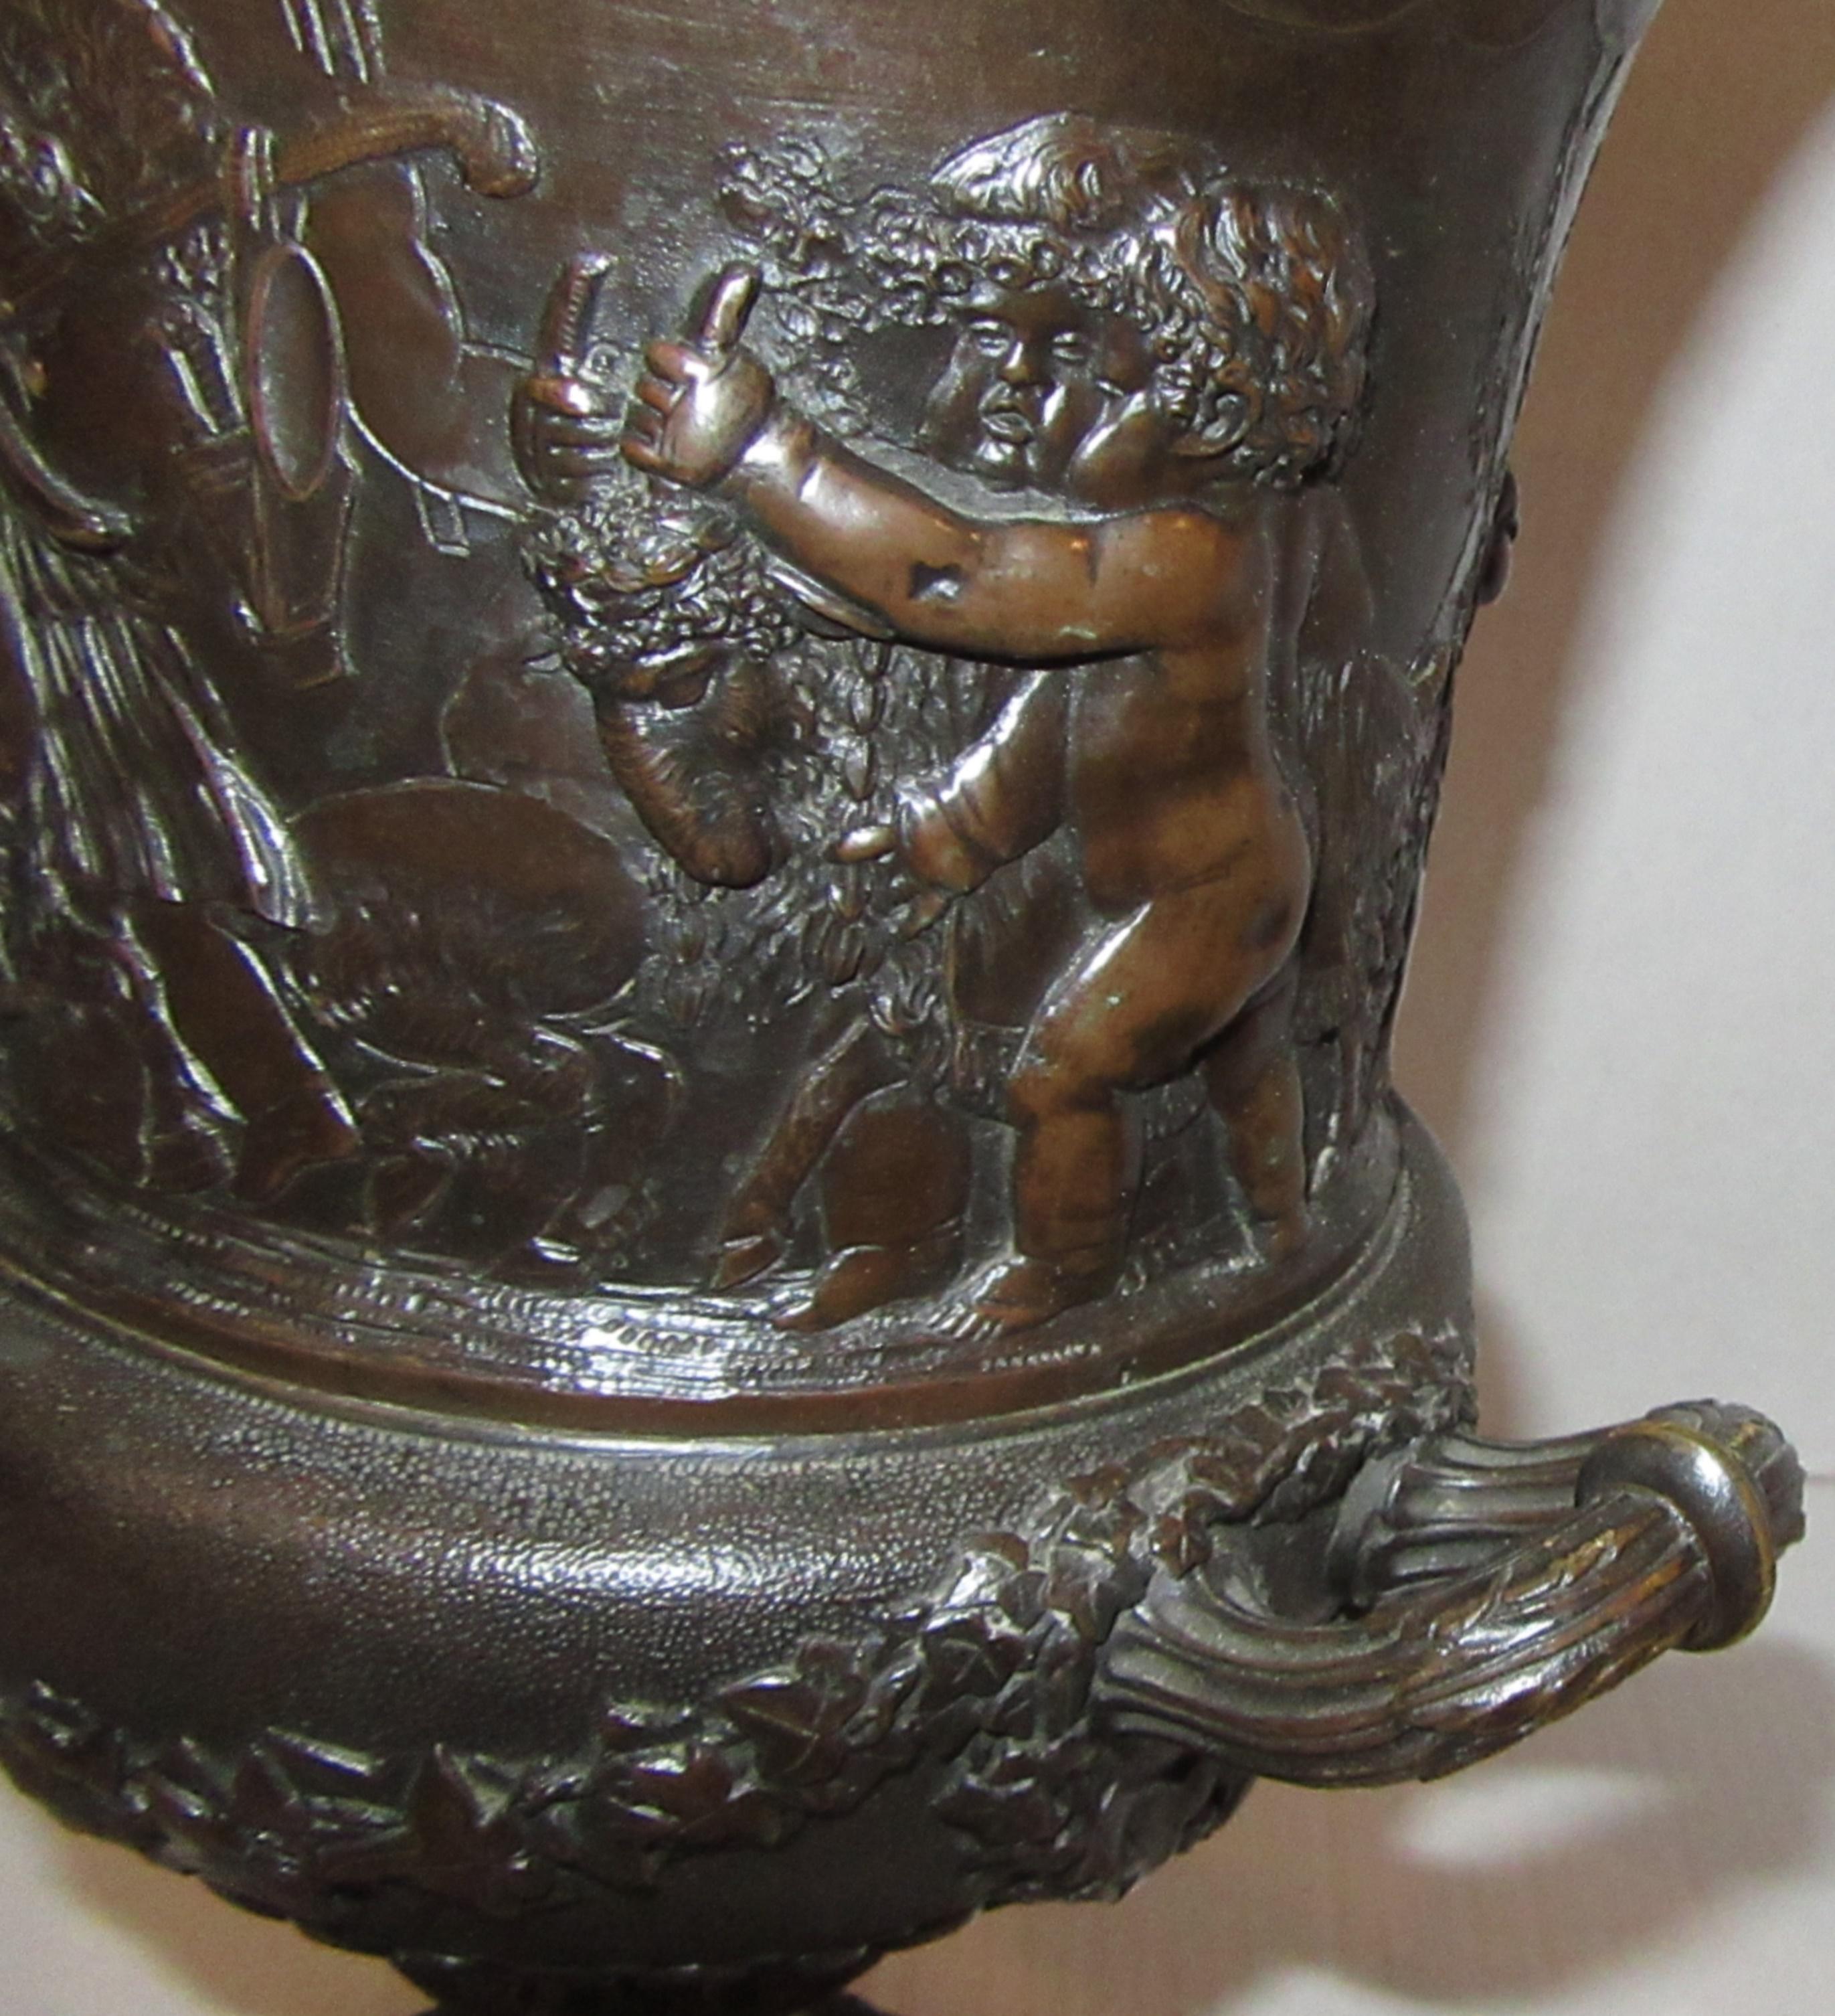 A campana form urn with twin handles, cast with frolicking putti and trailing ivy leaves. The basin seated on a spiral fluted foot over a square plinth. Stamped CLODION below one handle.
From the collection of Lord Vincent Constantine at Cross Hall